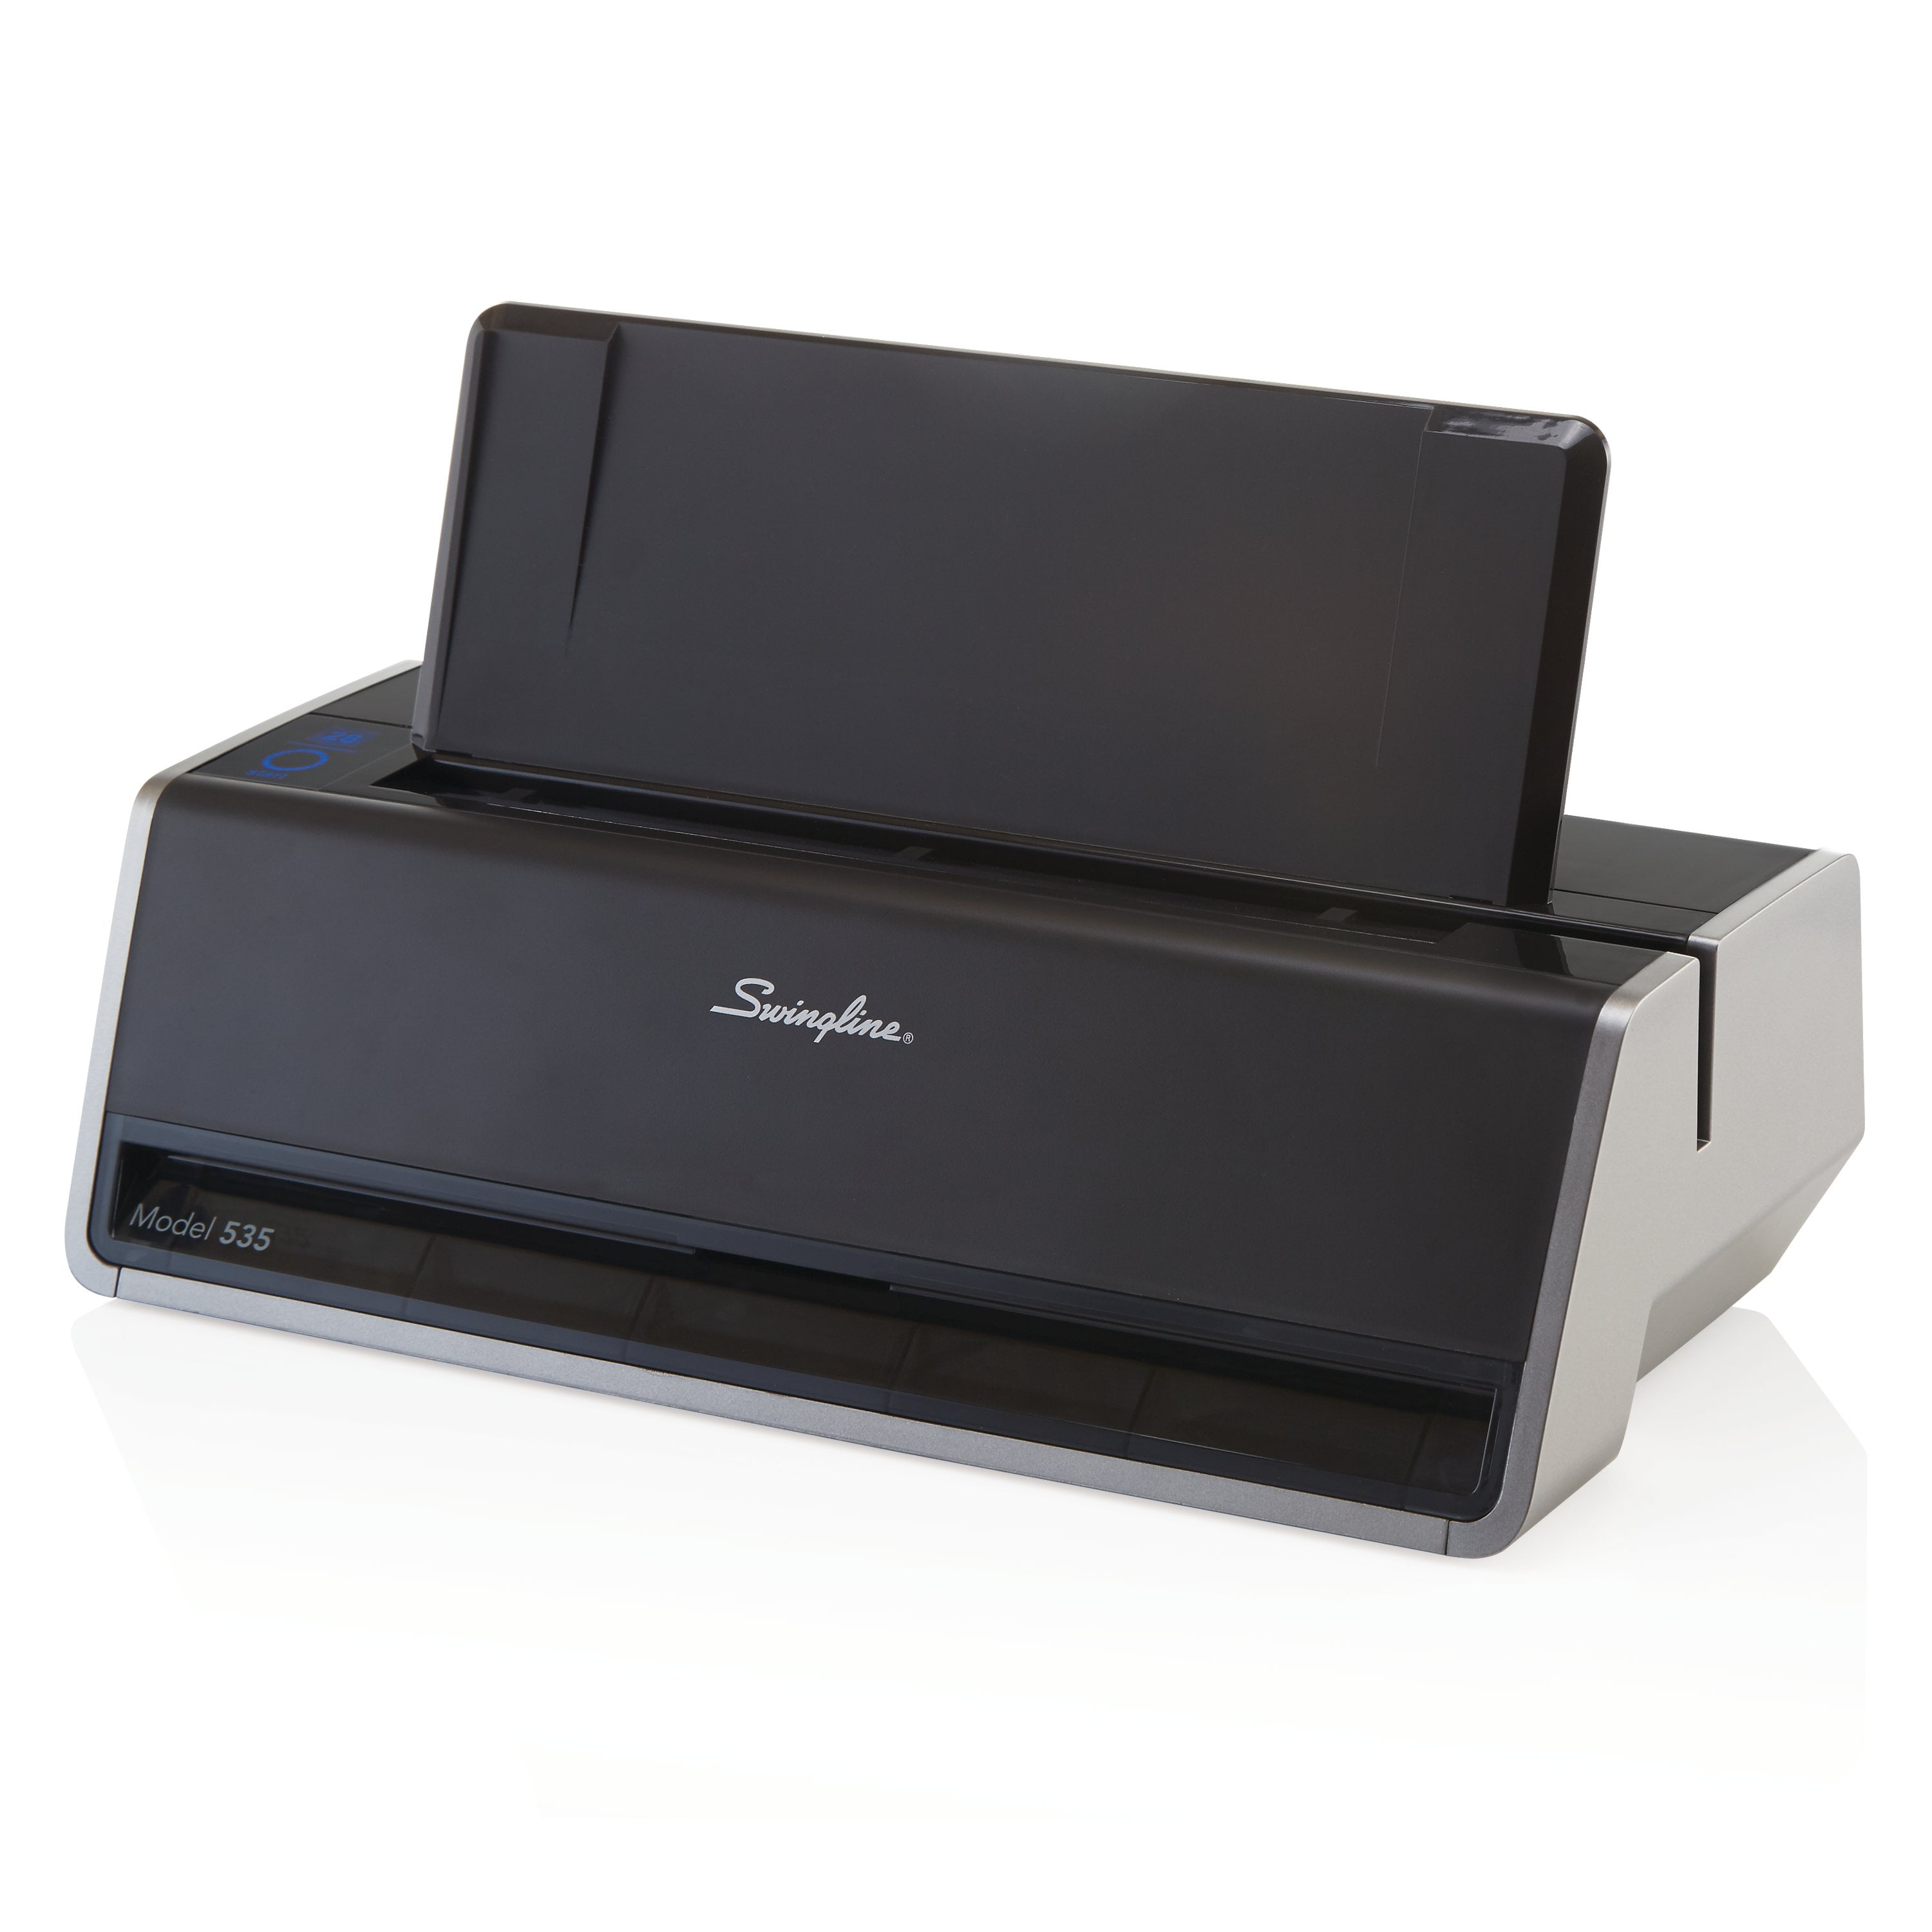 Swingline Electric 2 Hole Punch, Commercial Hole Puncher, 28 Sheet Punch  Capacity, Jam Resistant, Touch Screen, Platinum (74532)